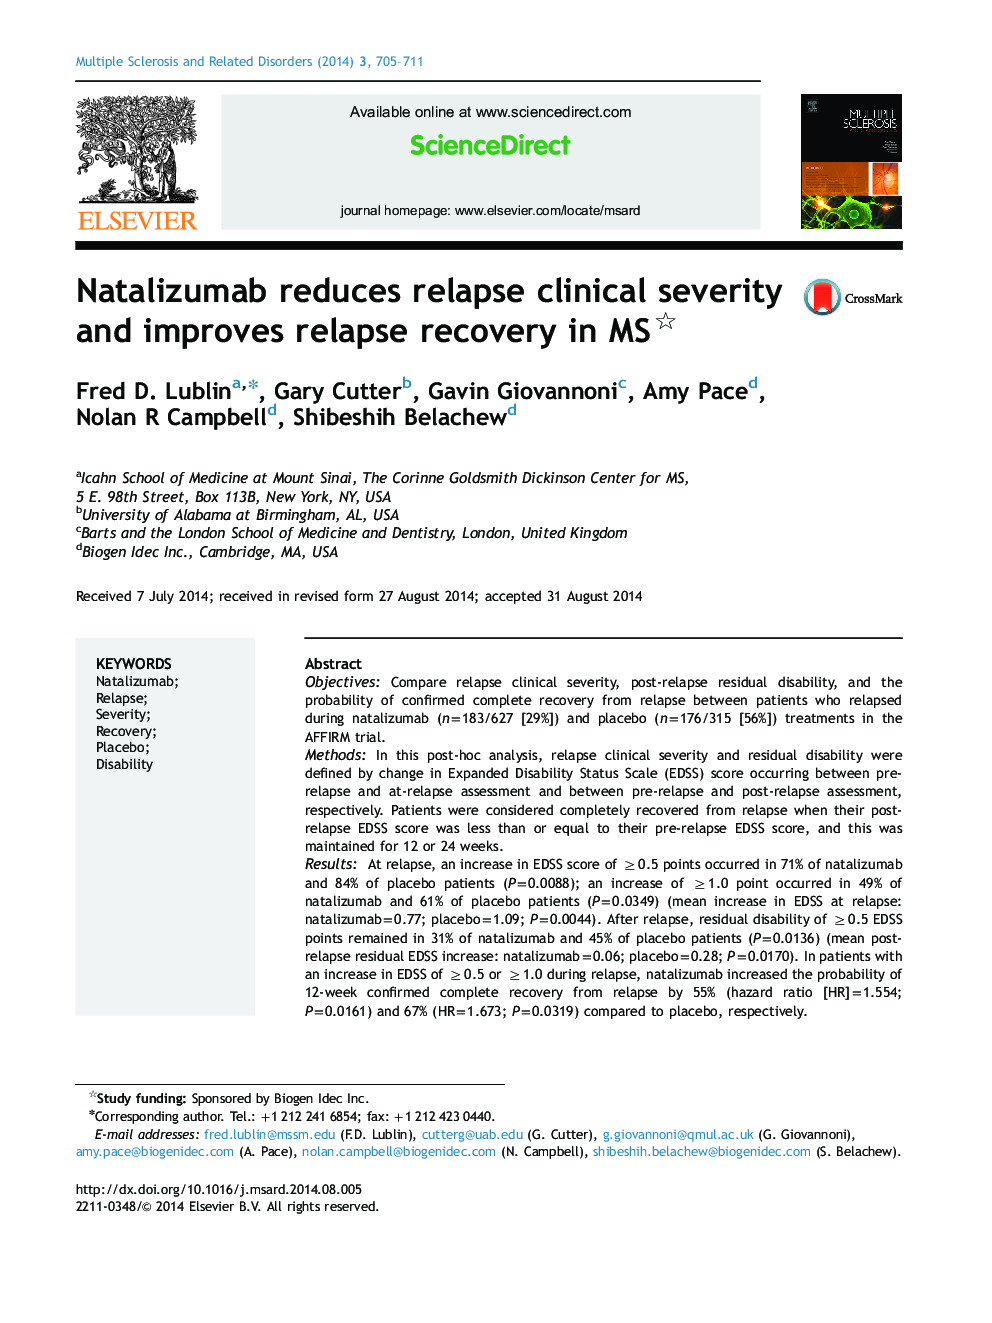 Natalizumab reduces relapse clinical severity and improves relapse recovery in MS